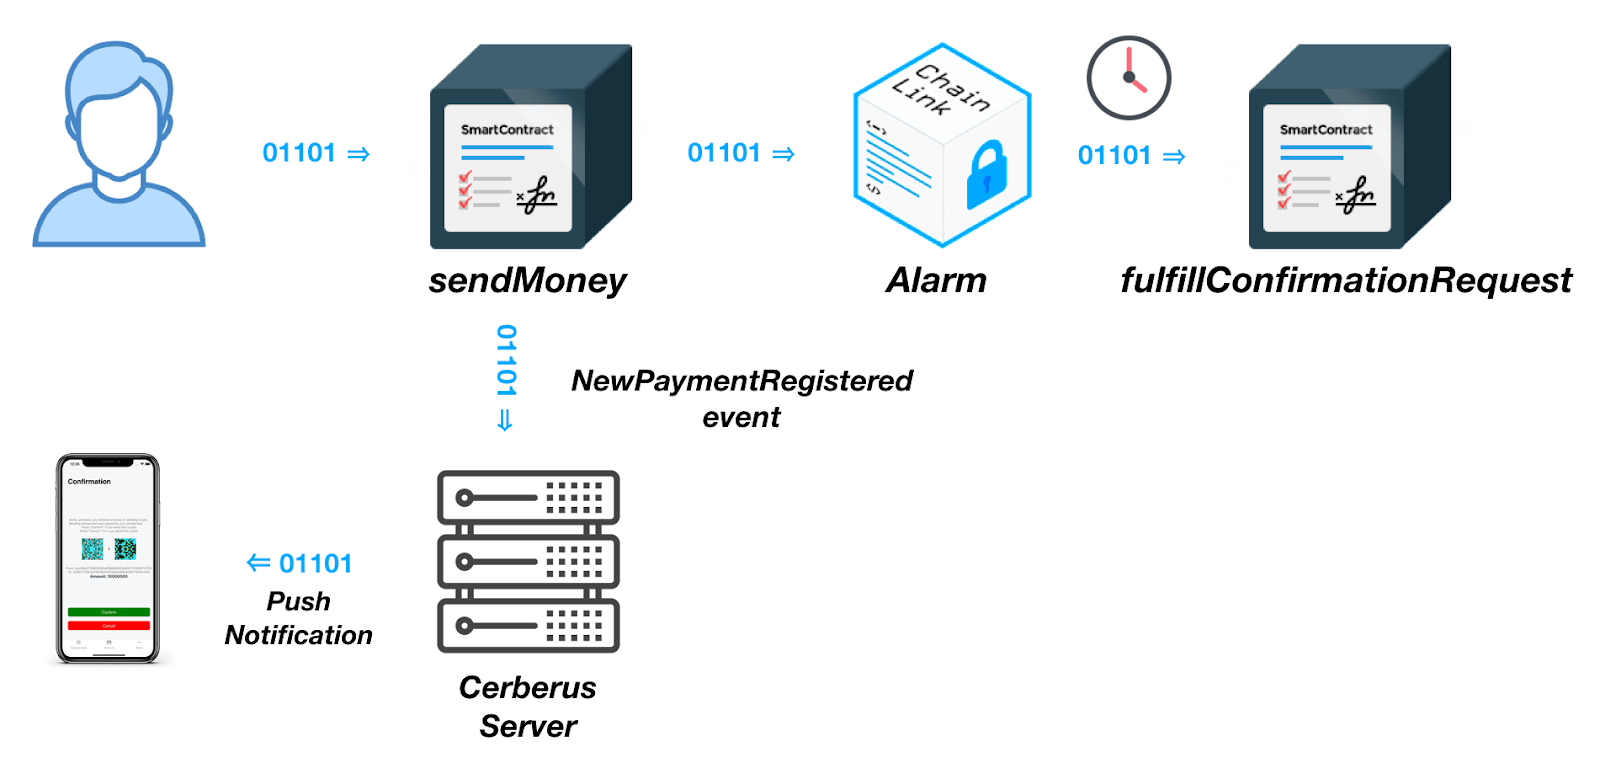 The basic architecture of how a transaction happens using Cerebus Wallet